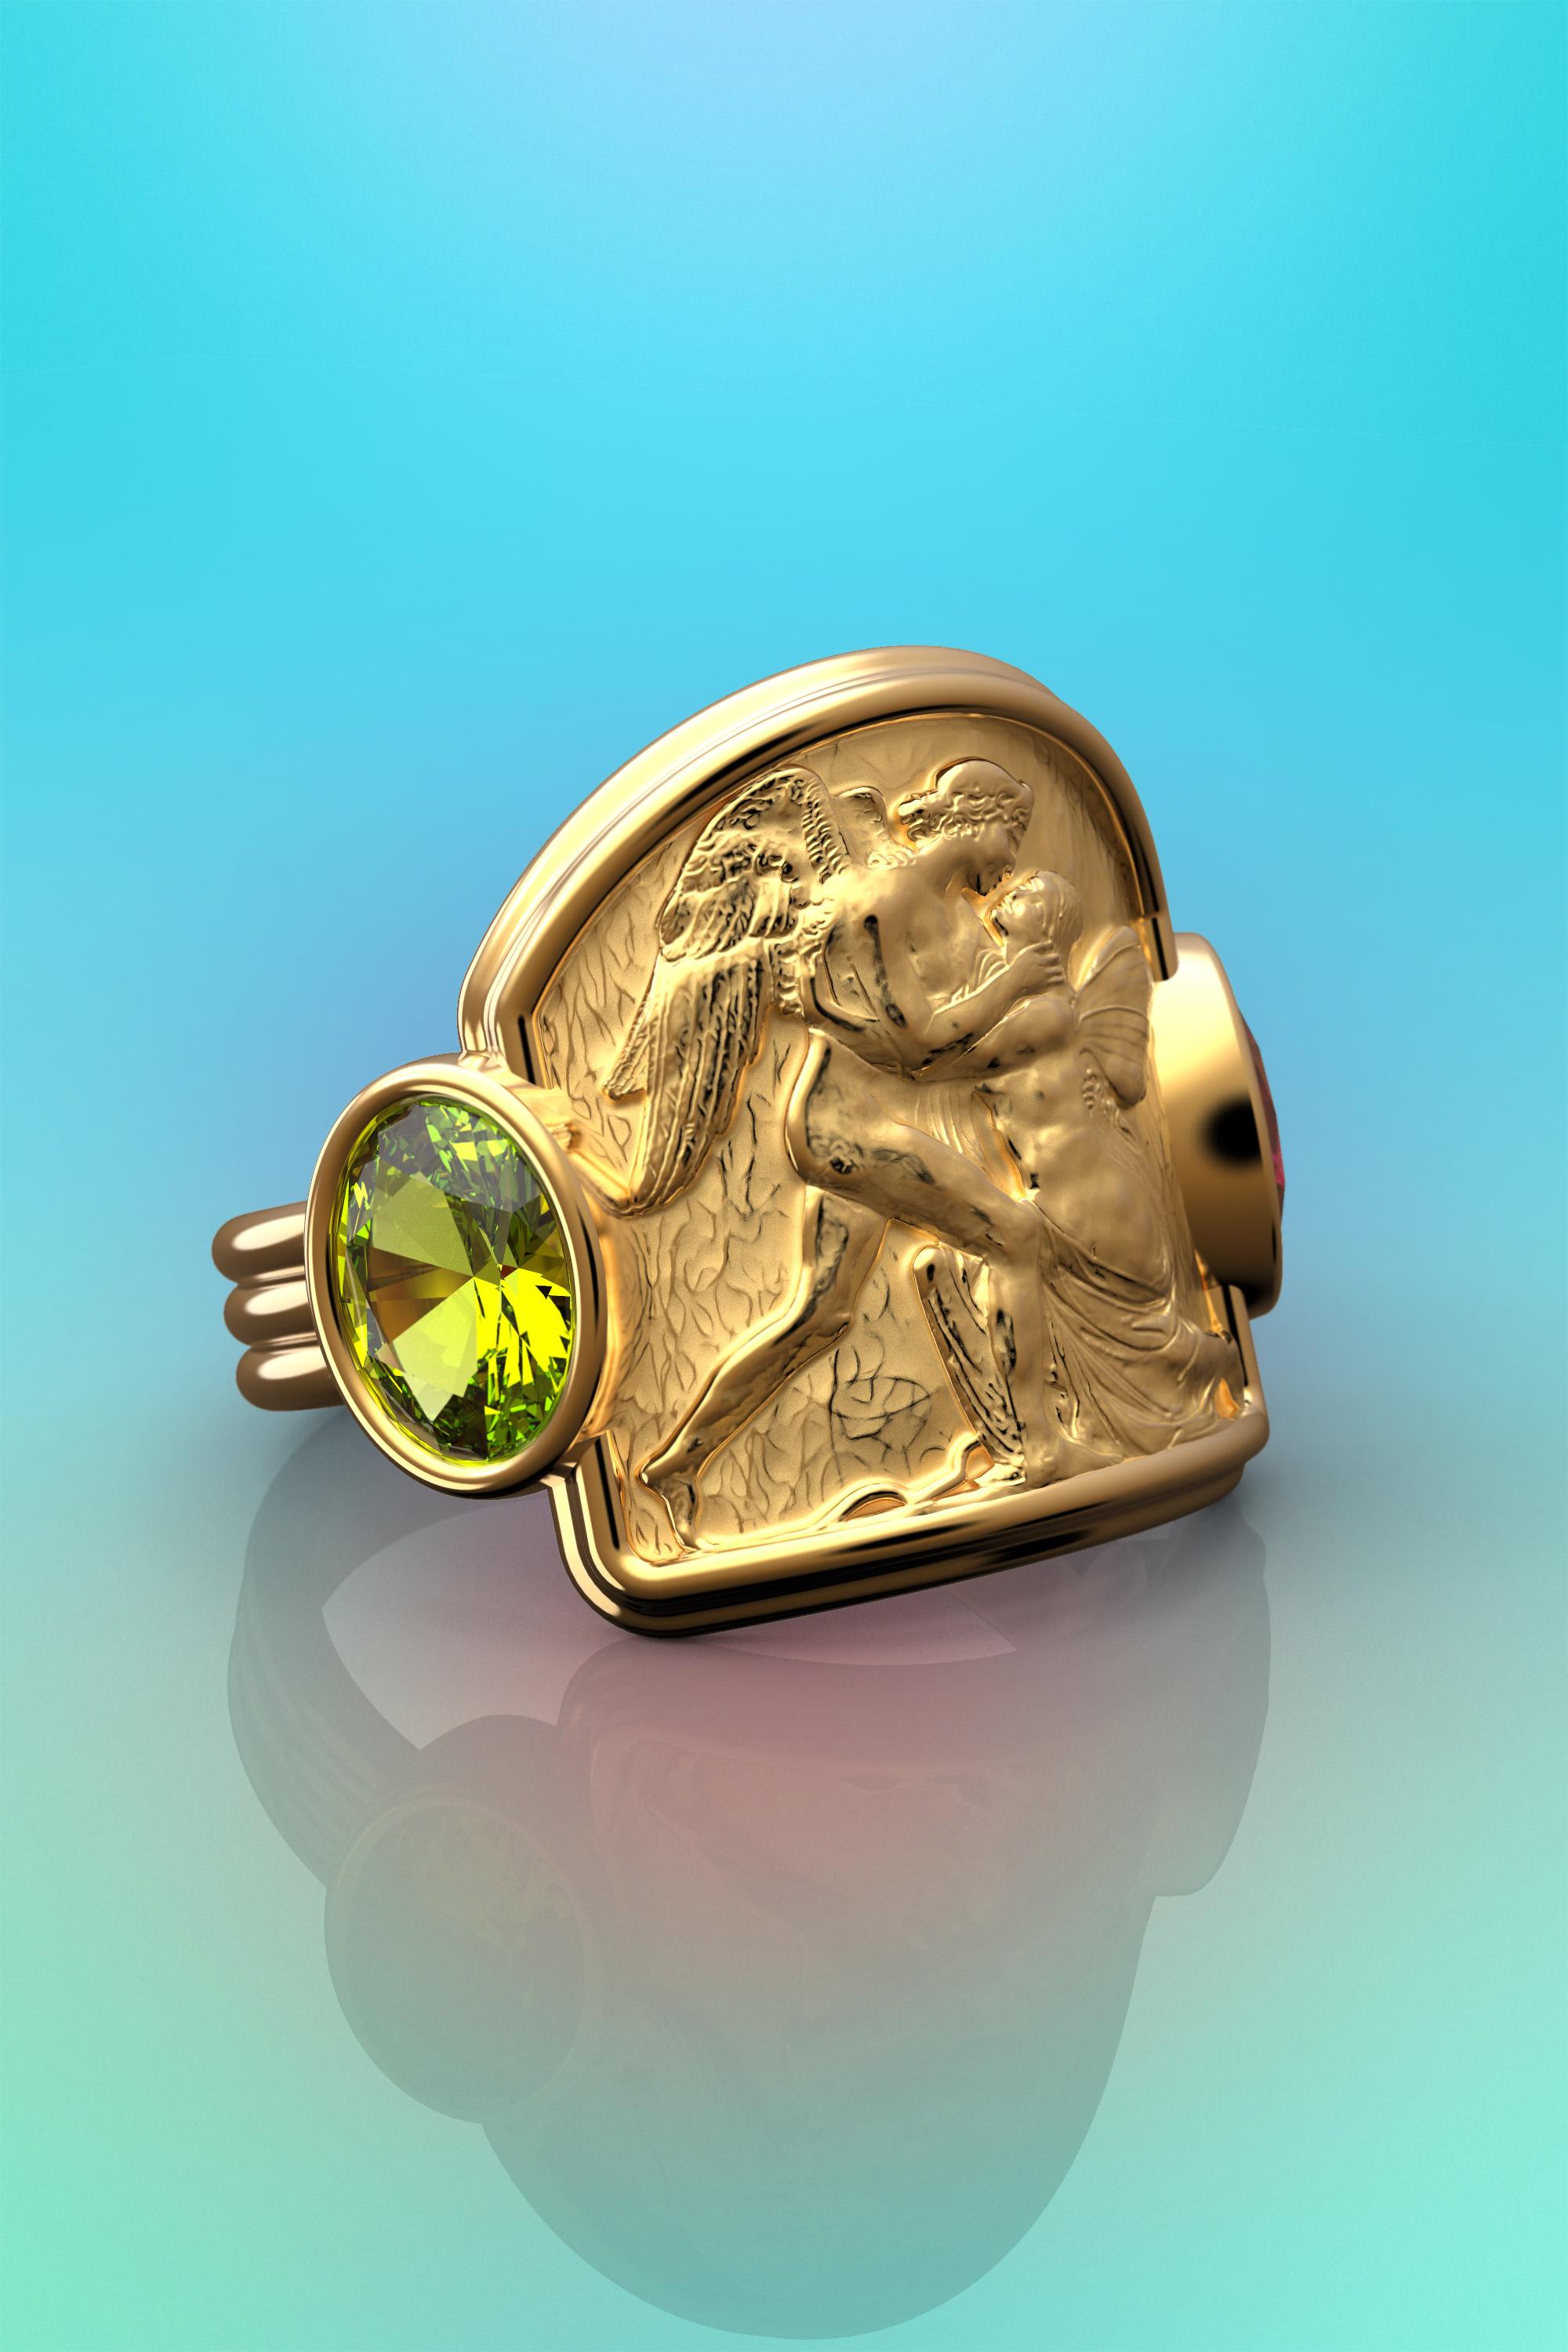 For Sale:  Oltremare Gioielli Sculptural Ring, Love and Psyche 18k Gold Ring, Italian Gold 10